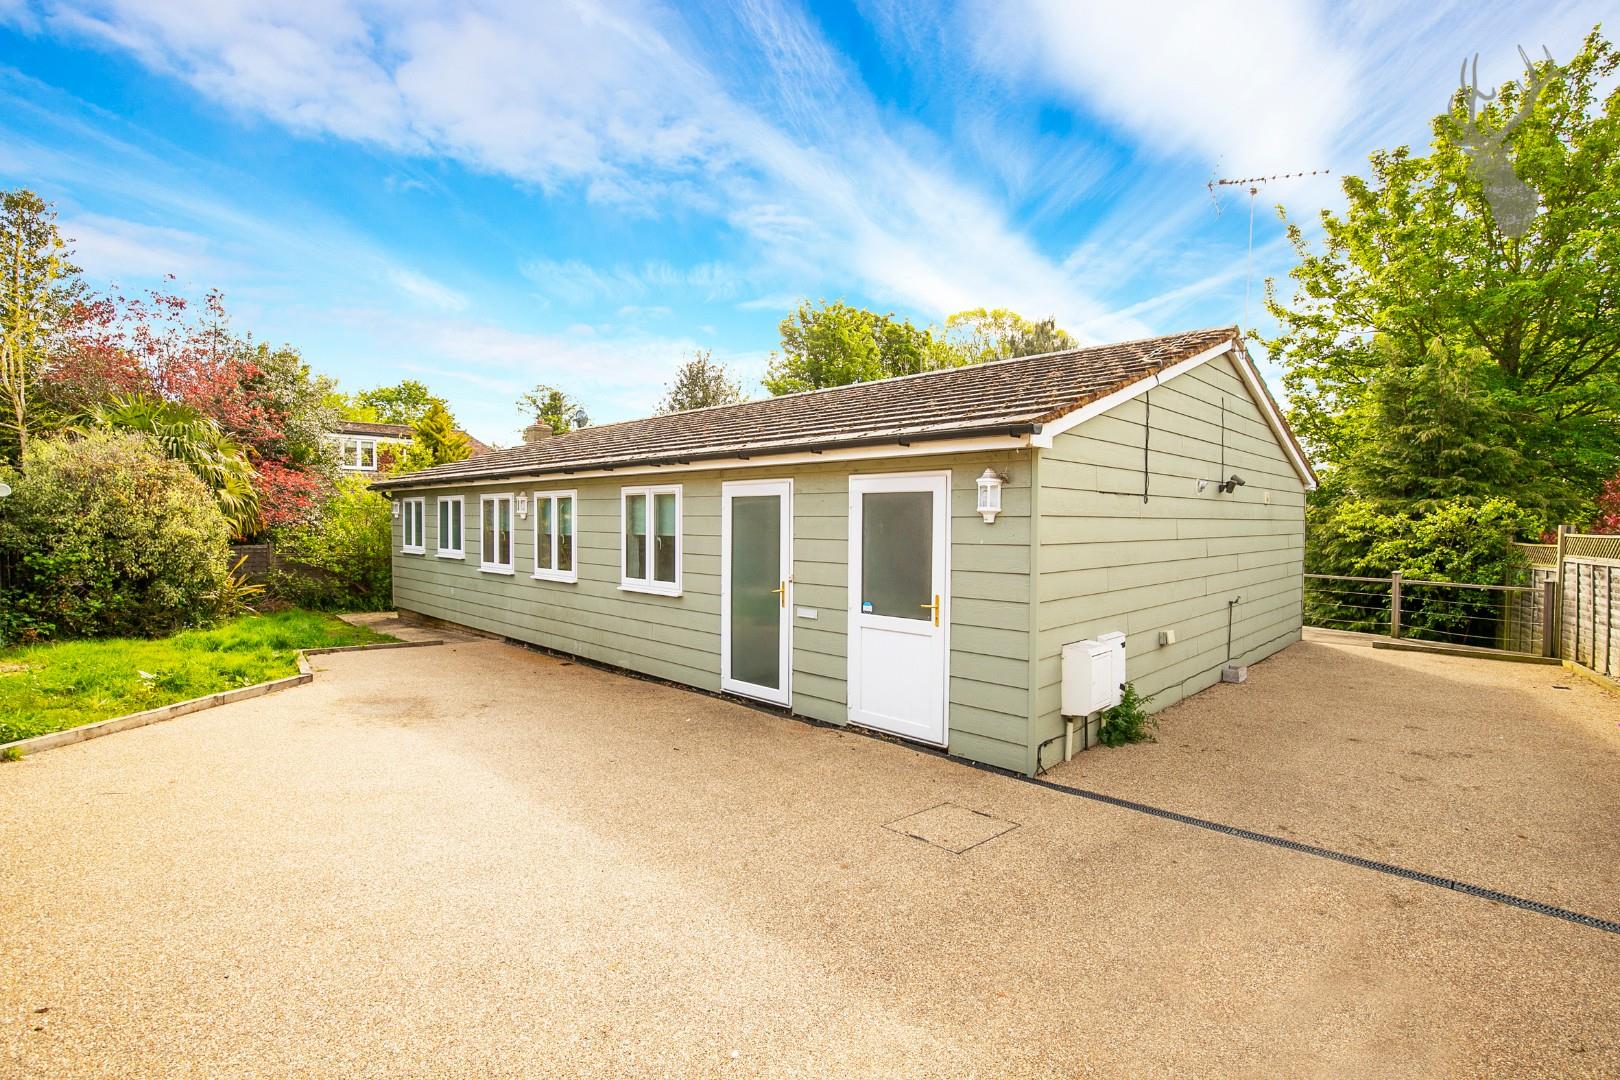 Similar Property: Bungalow - Detached in Epping